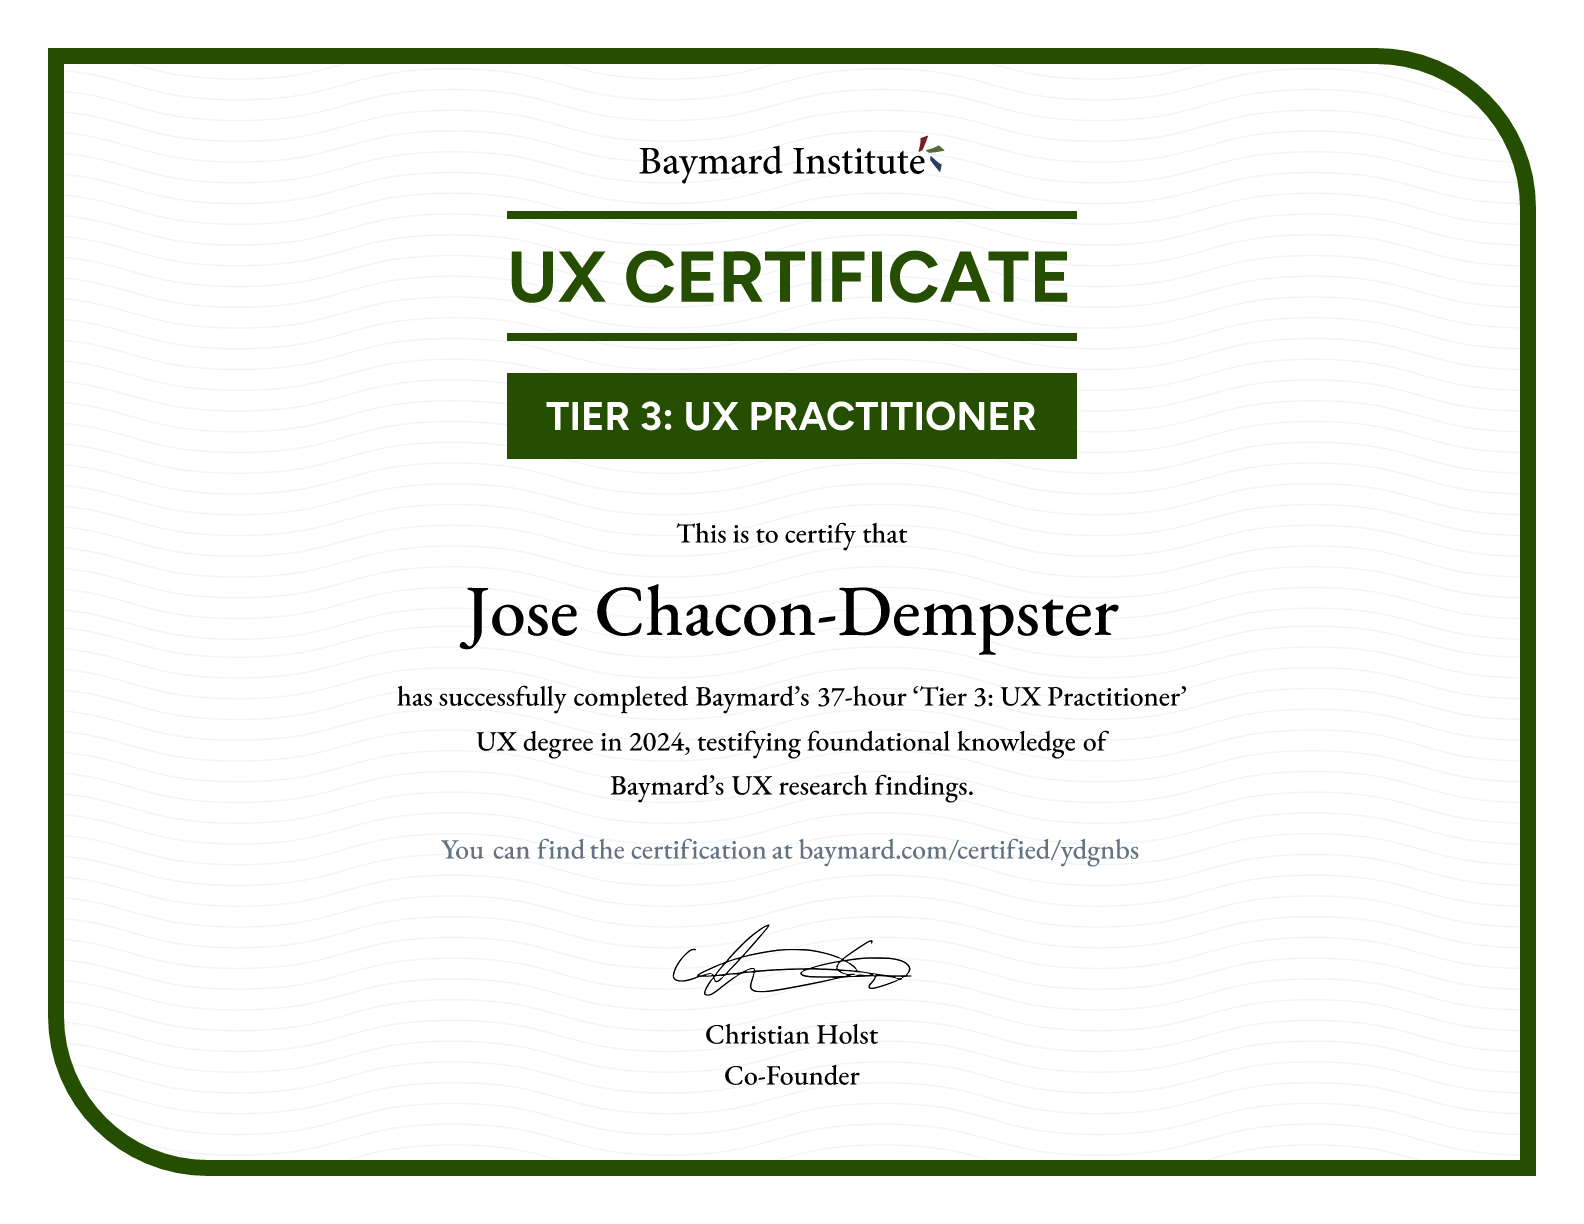 Jose Chacon-Dempster’s certificate